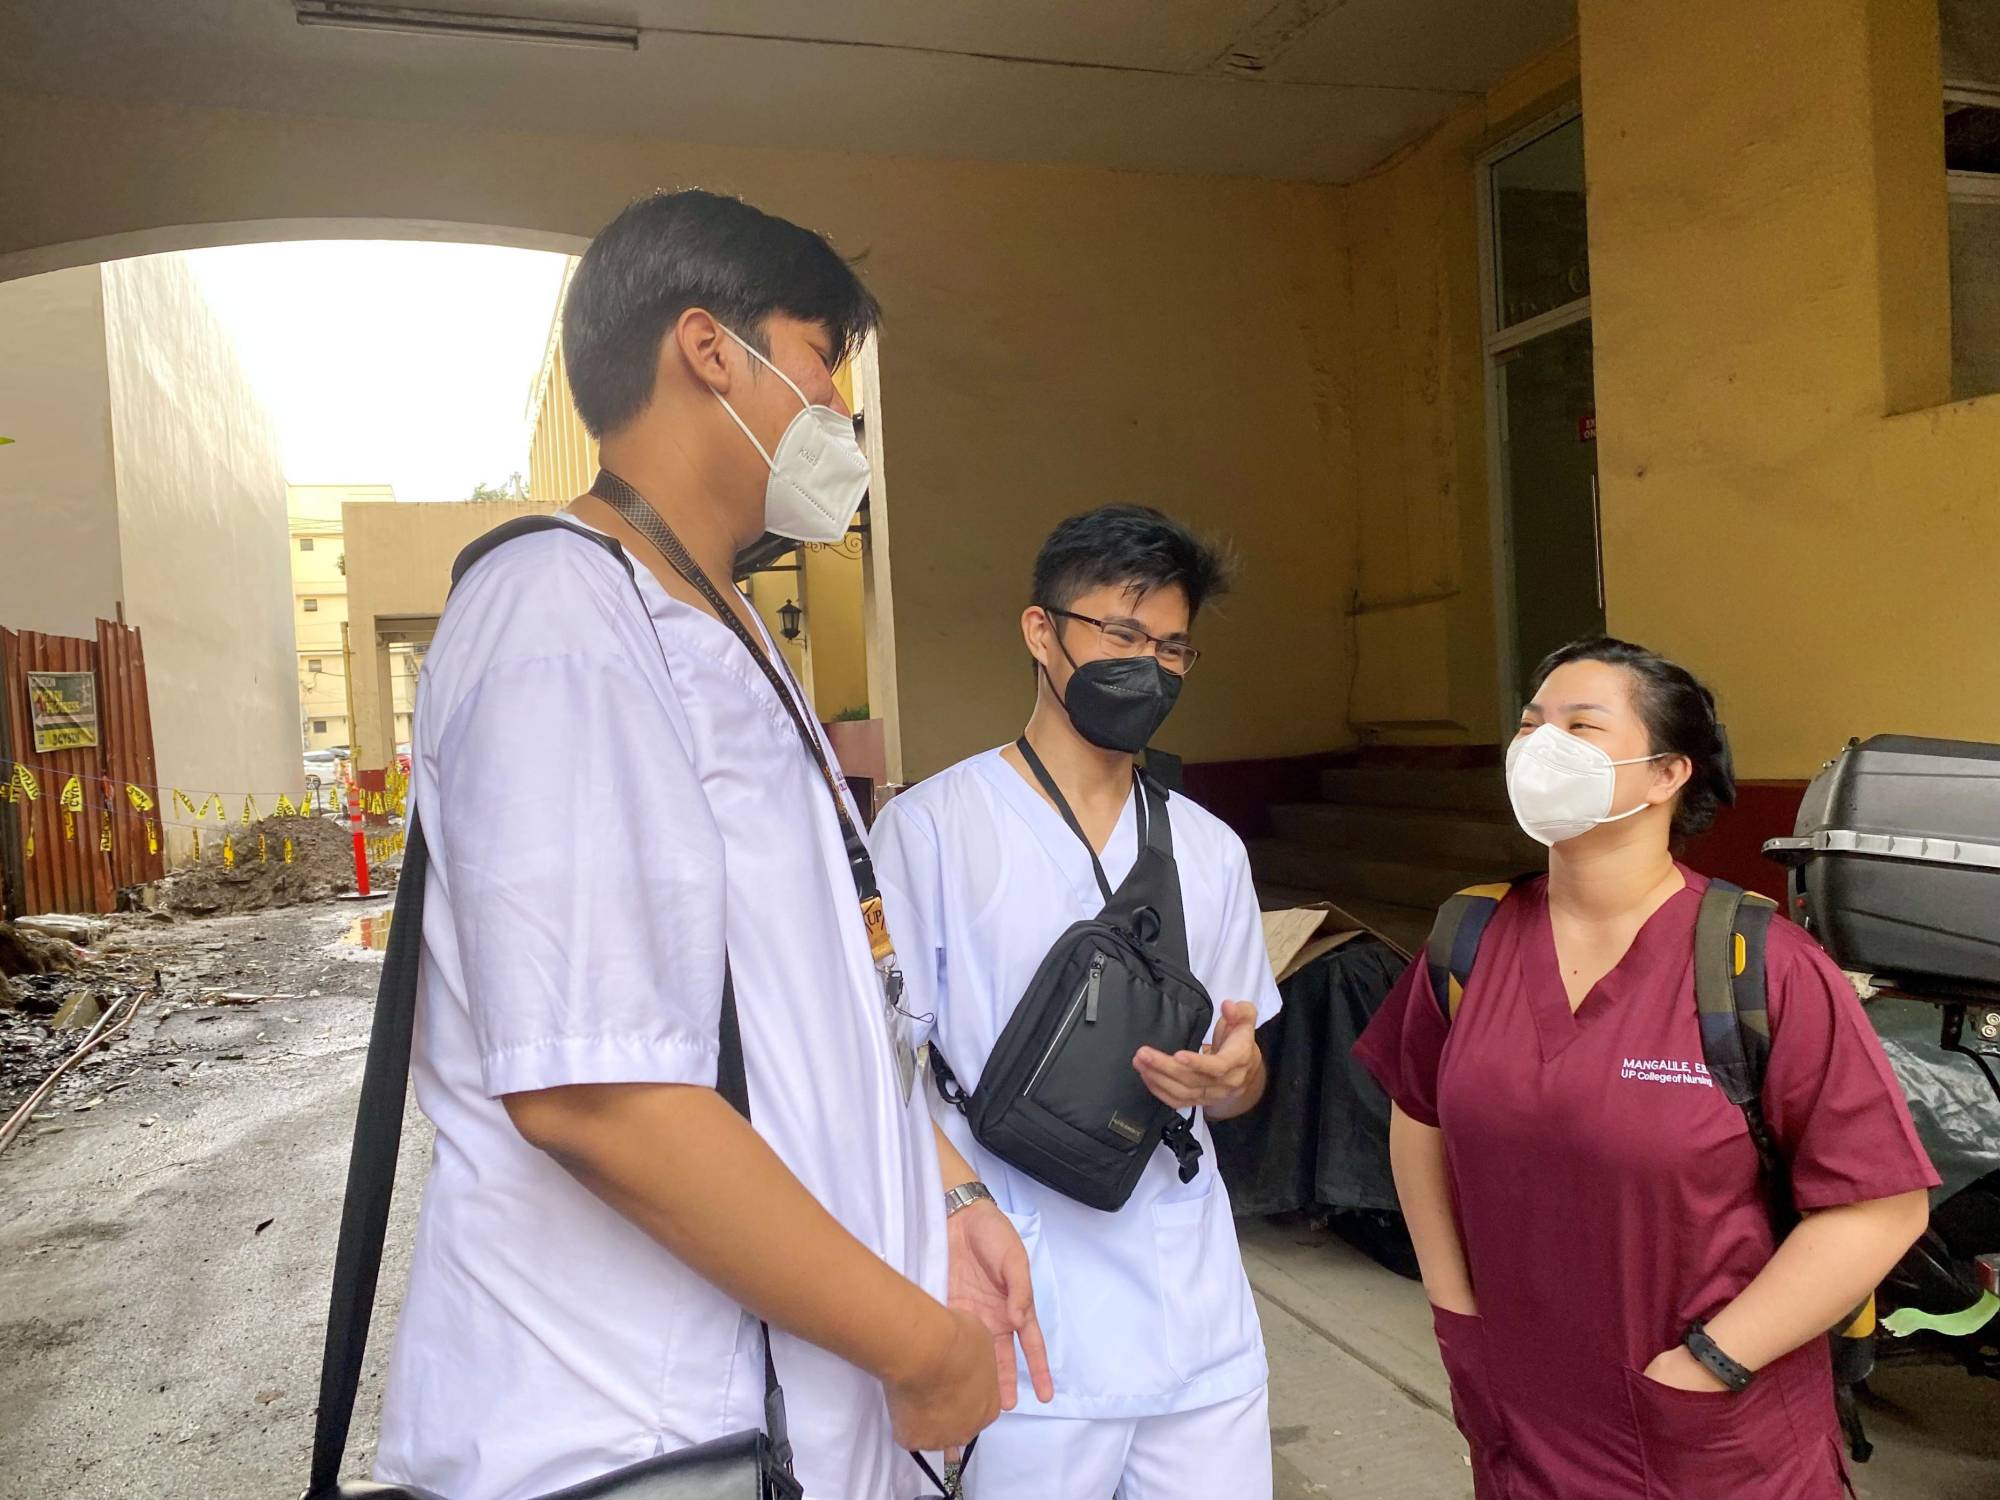 Junior nursing student Jan Yago (center) talks with fellow students in Manila on Oct. 29. Yago hopes to obtain employment in Japan after gaining sufficient work experience in the Philippines. | KYODO